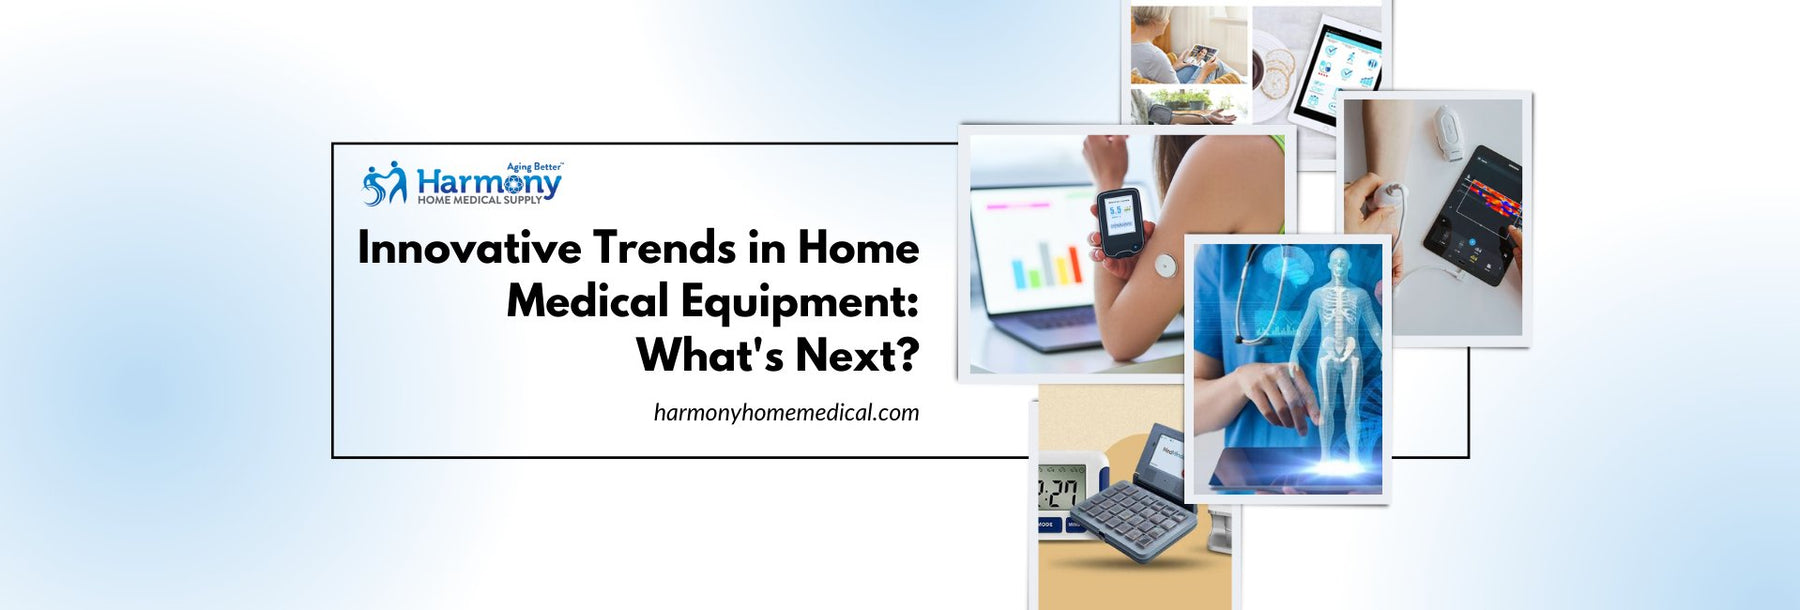 Innovative Trends in Home Medical Equipment: What's Next? - Harmony Home Medical Supply